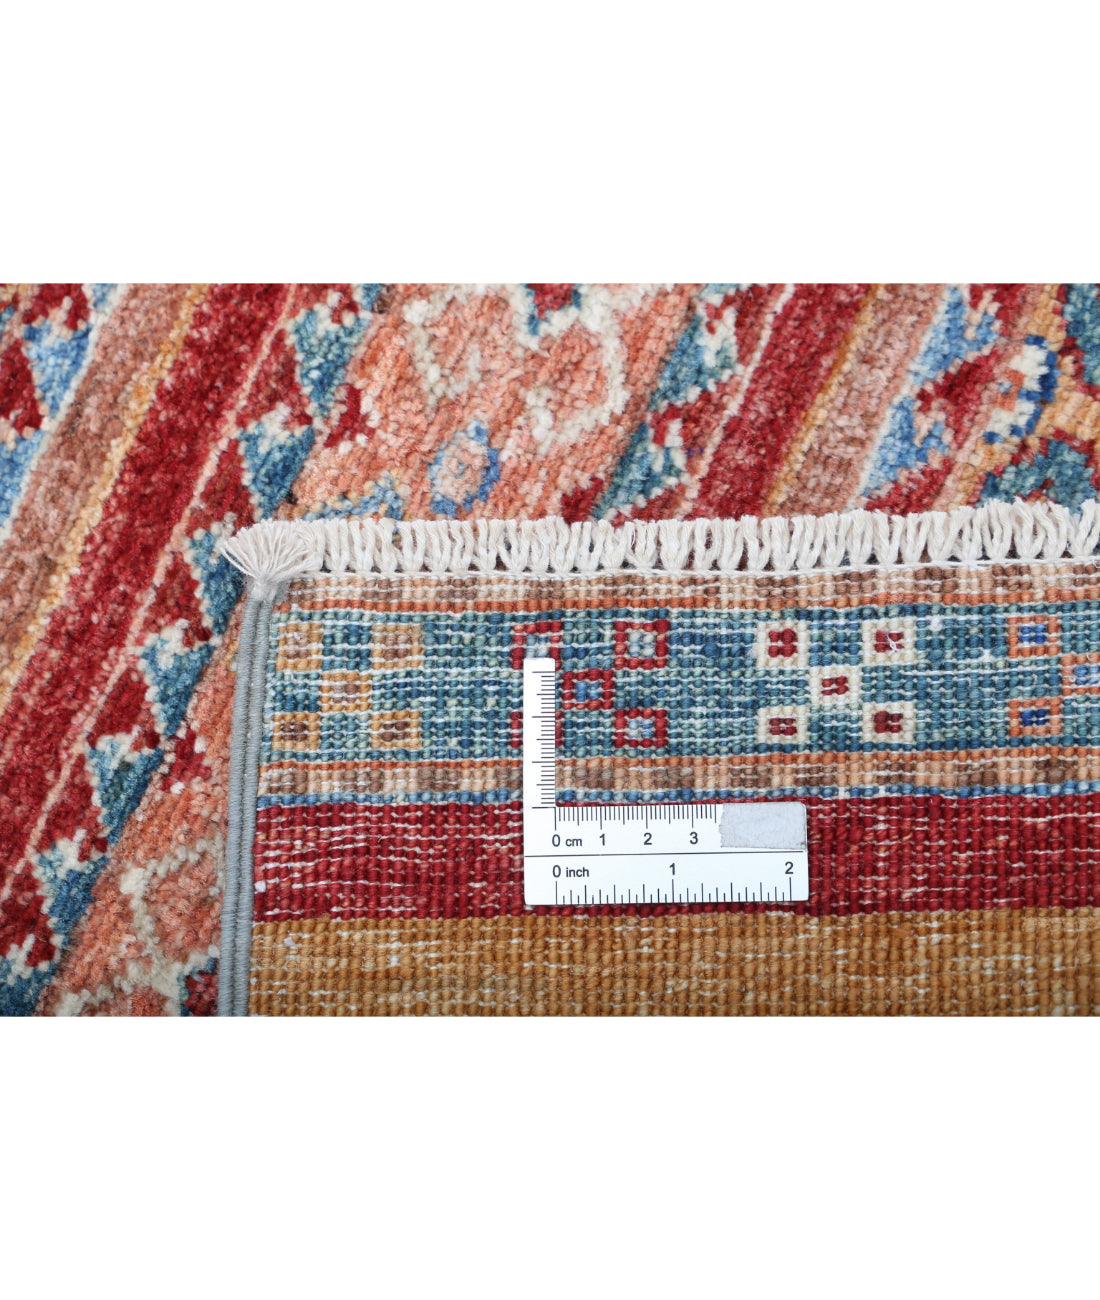 Hand Knotted Khurjeen Wool Rug - 2'8'' x 3'9'' 2'8'' x 3'9'' (80 X 113) / Multi / Multi